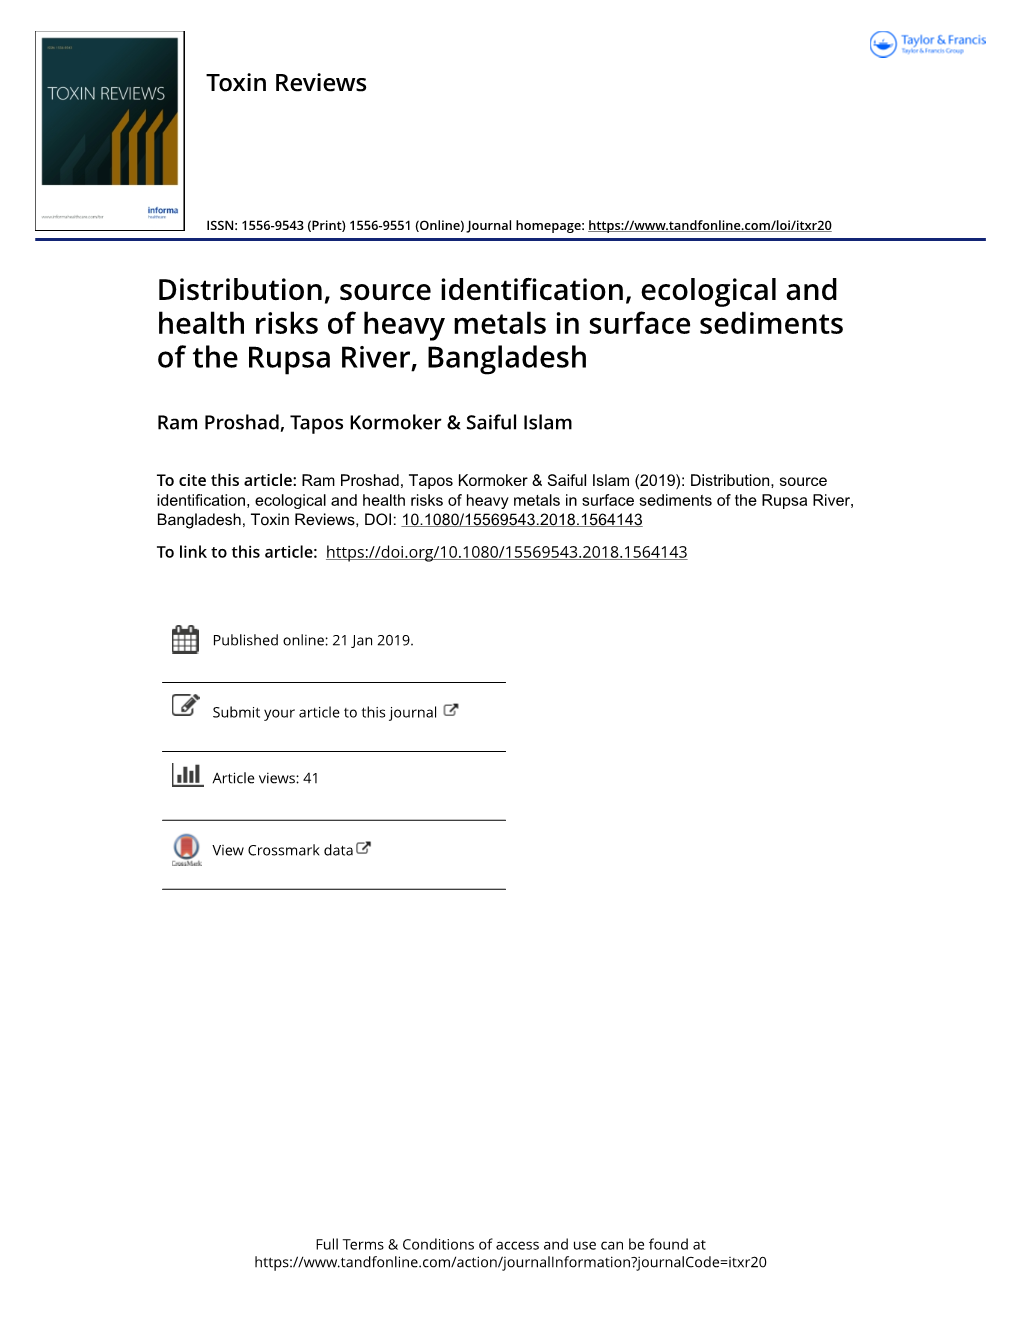 Distribution, Source Identification, Ecological and Health Risks of Heavy Metals in Surface Sediments of the Rupsa River, Bangladesh